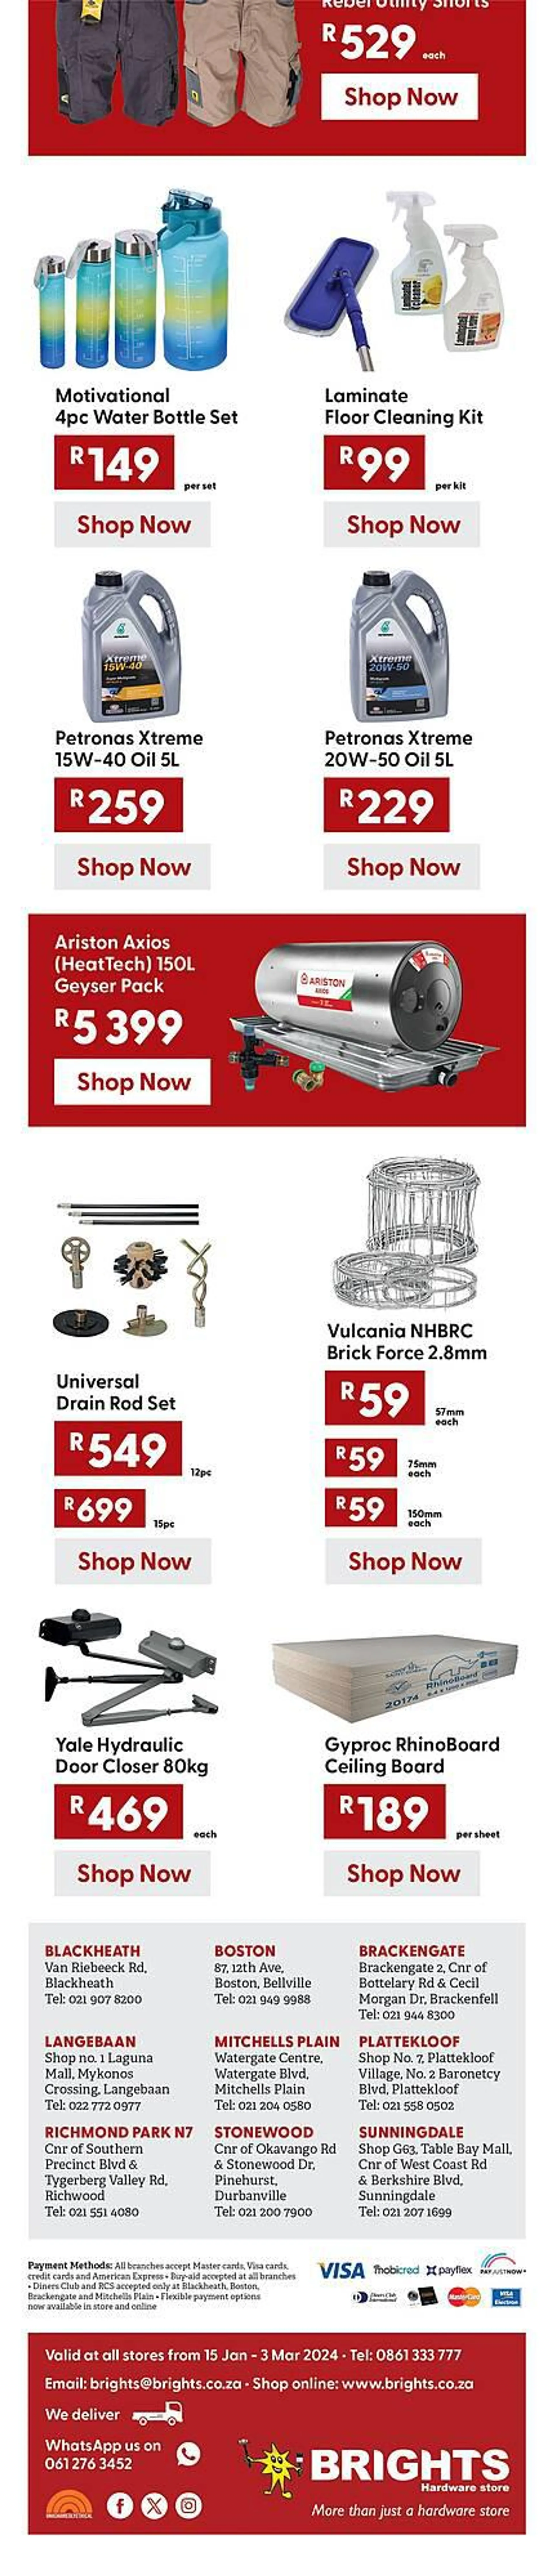 Brights Hardware catalogue - 15 January 3 March 2024 - Page 4